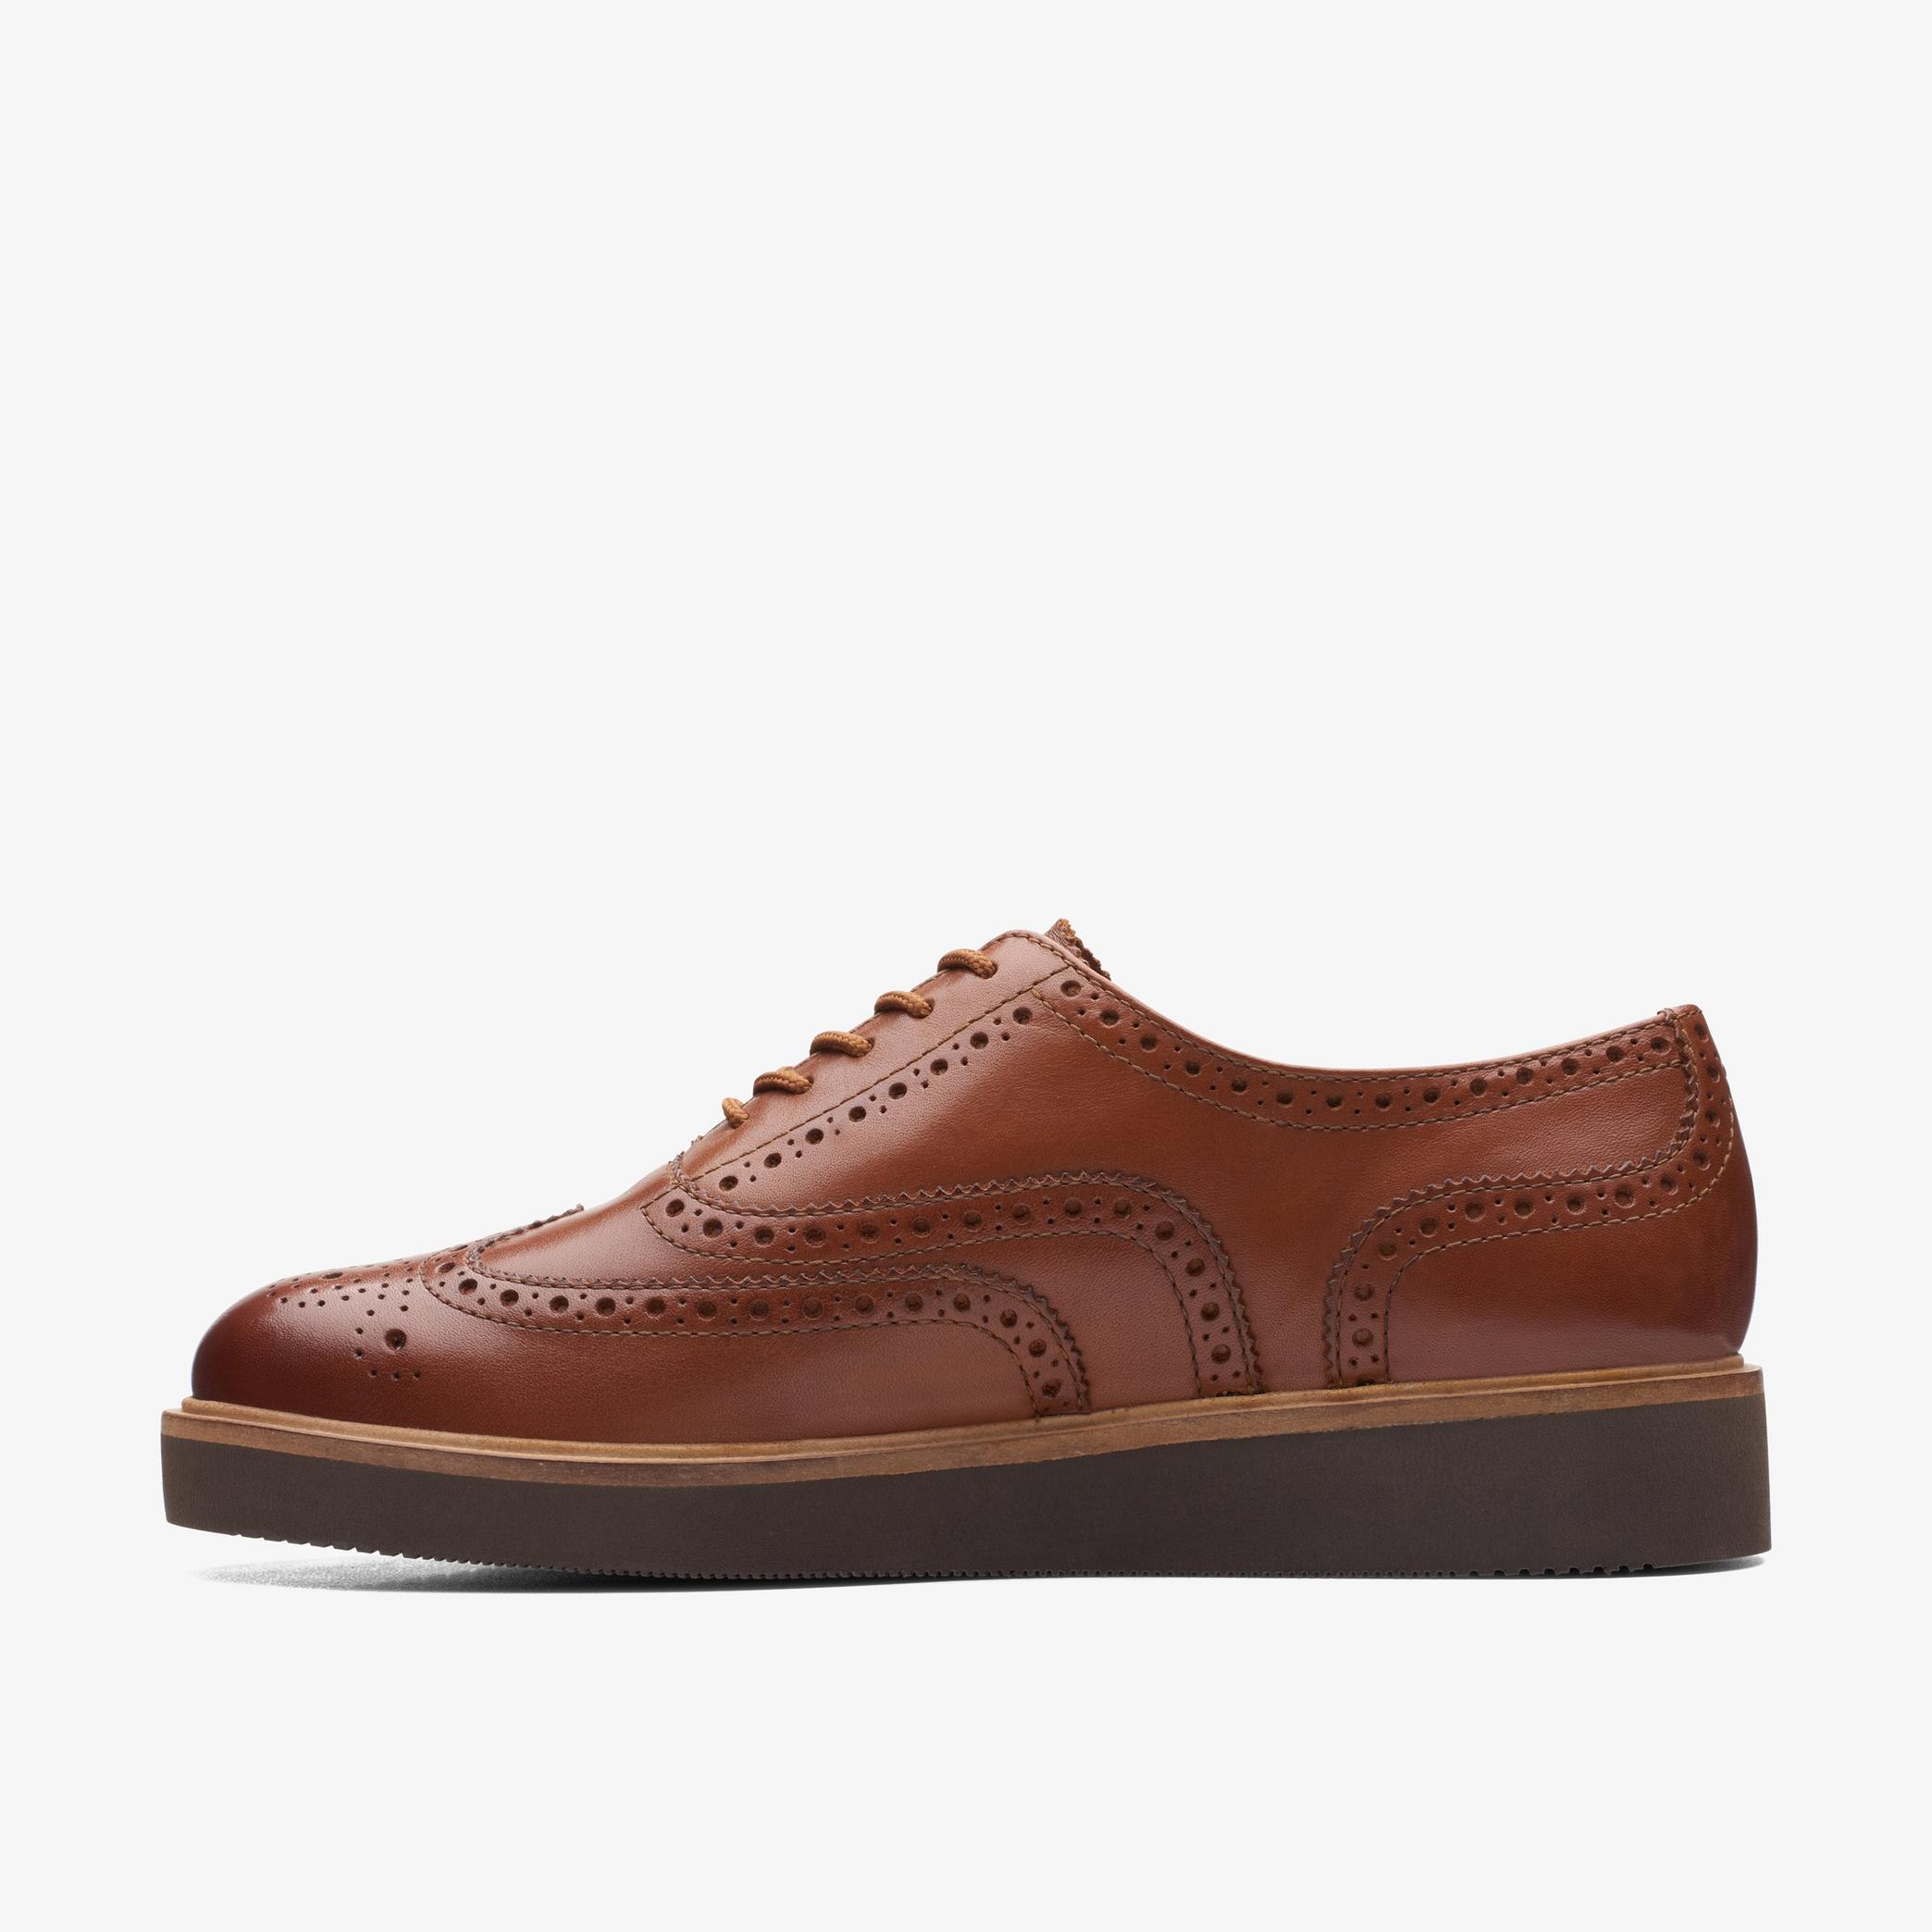 Glickly Brogue Dark Tan Leather Brogues, view 2 of 6